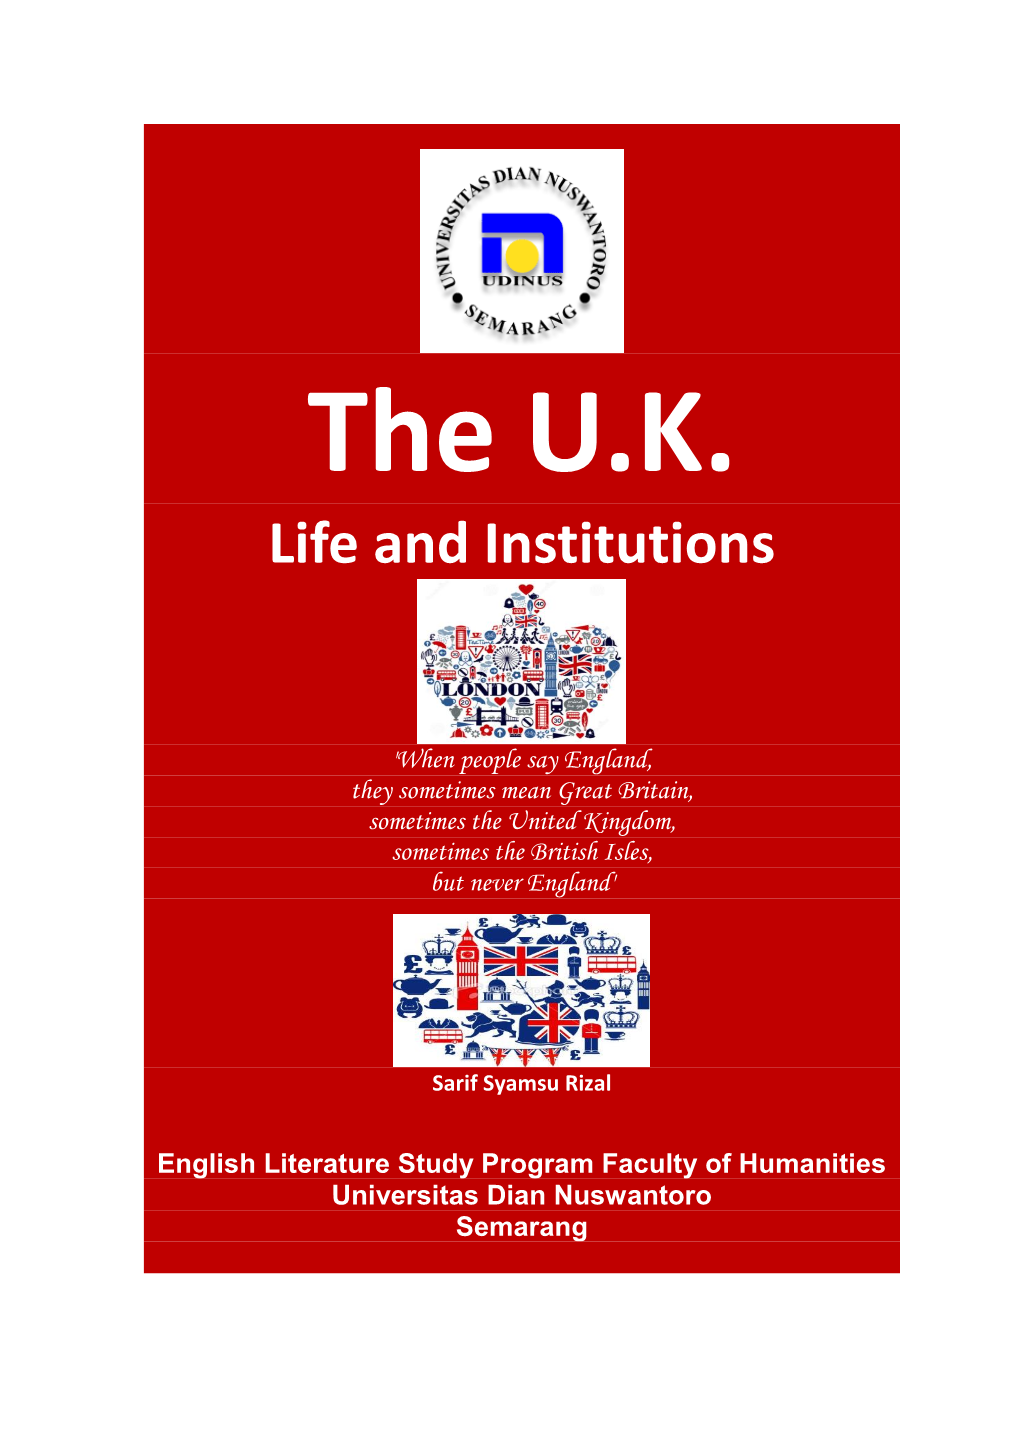 Life and Institutions